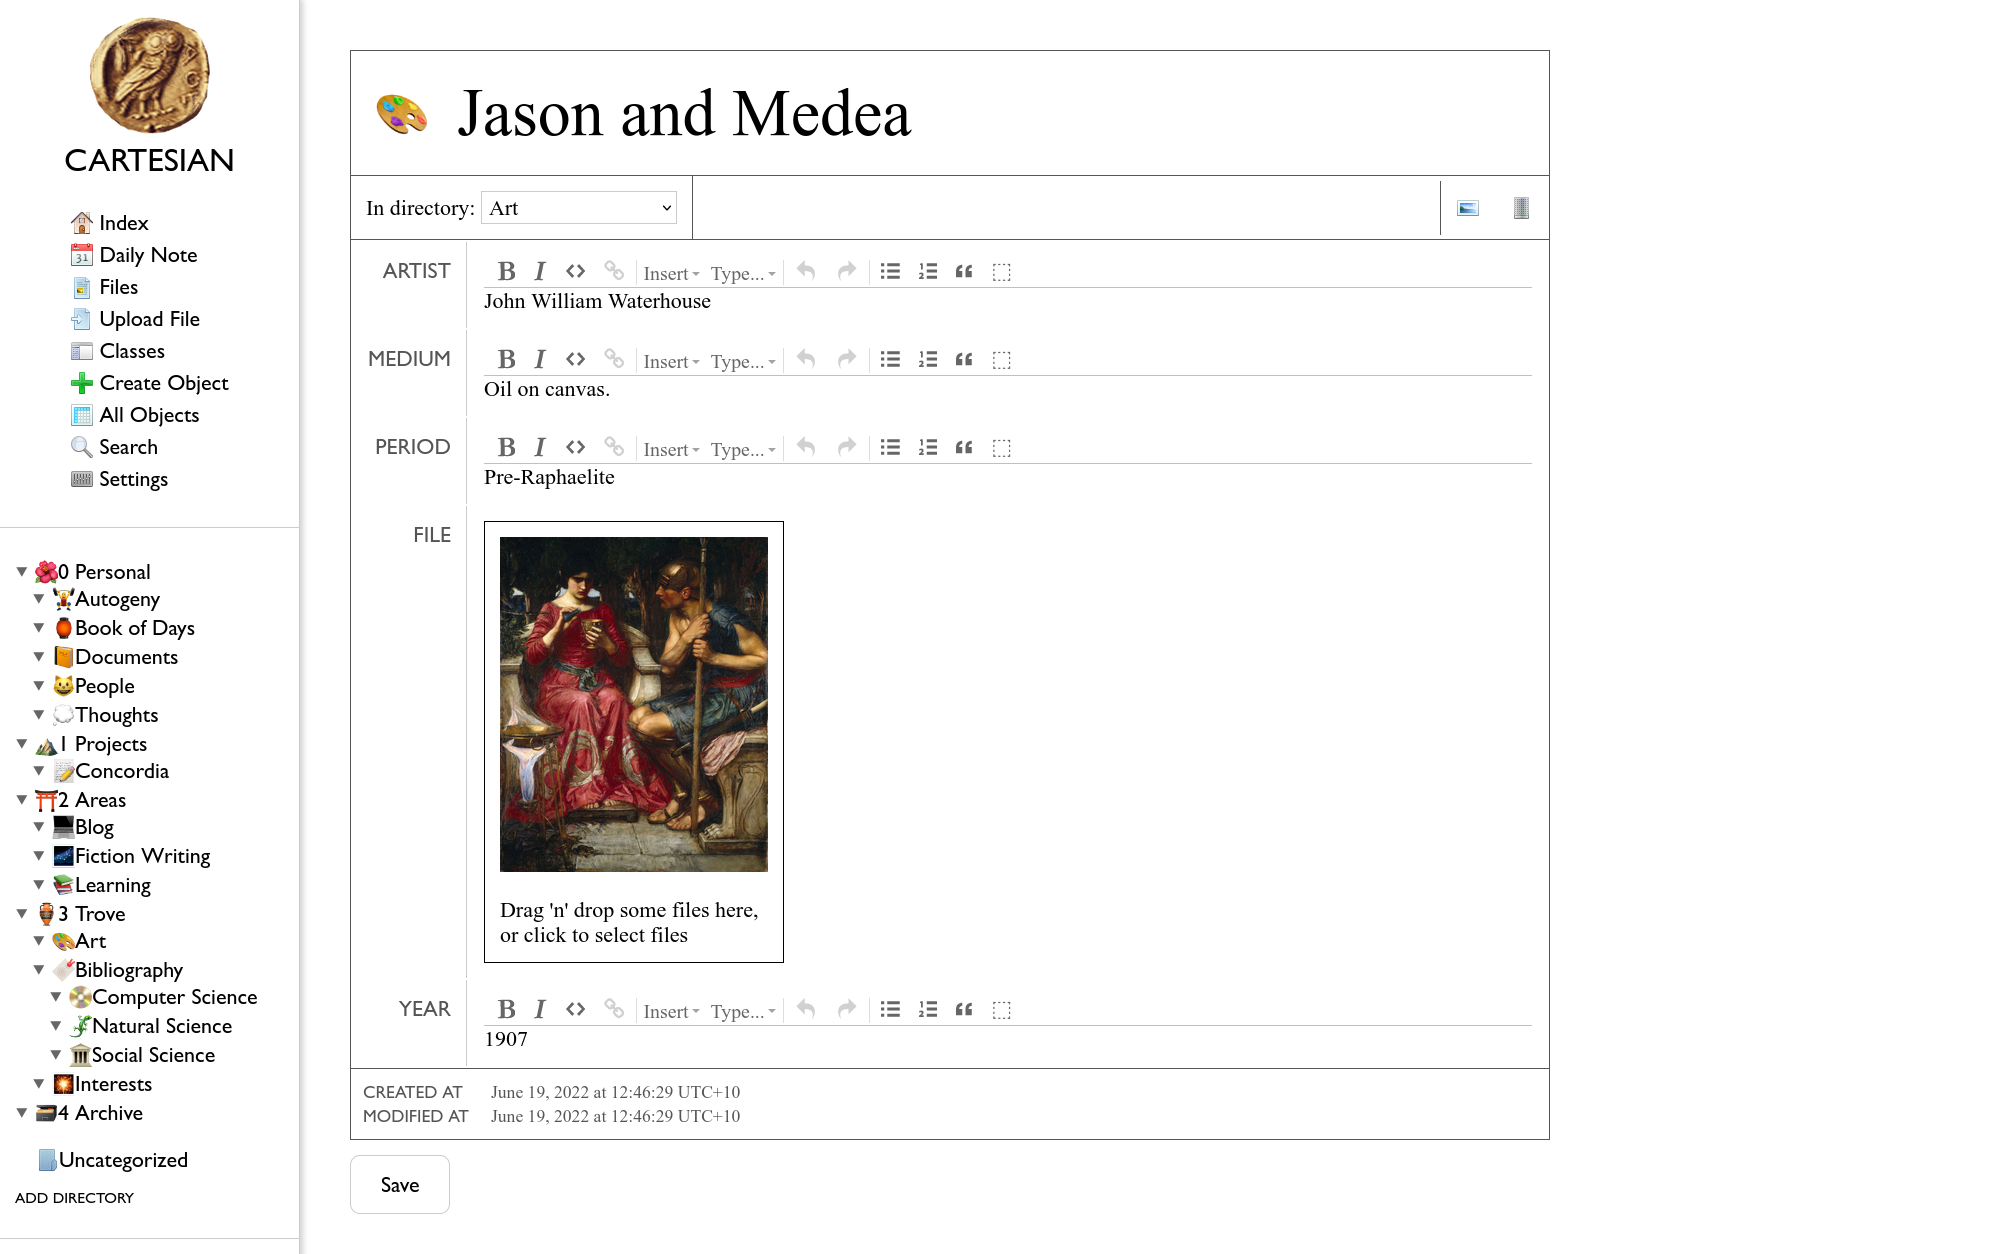 A screenshot of my personal wiki, showing an entry for John William Waterhouse's Jason and Medea, with fields for the artist, medium, period, image file, and year.